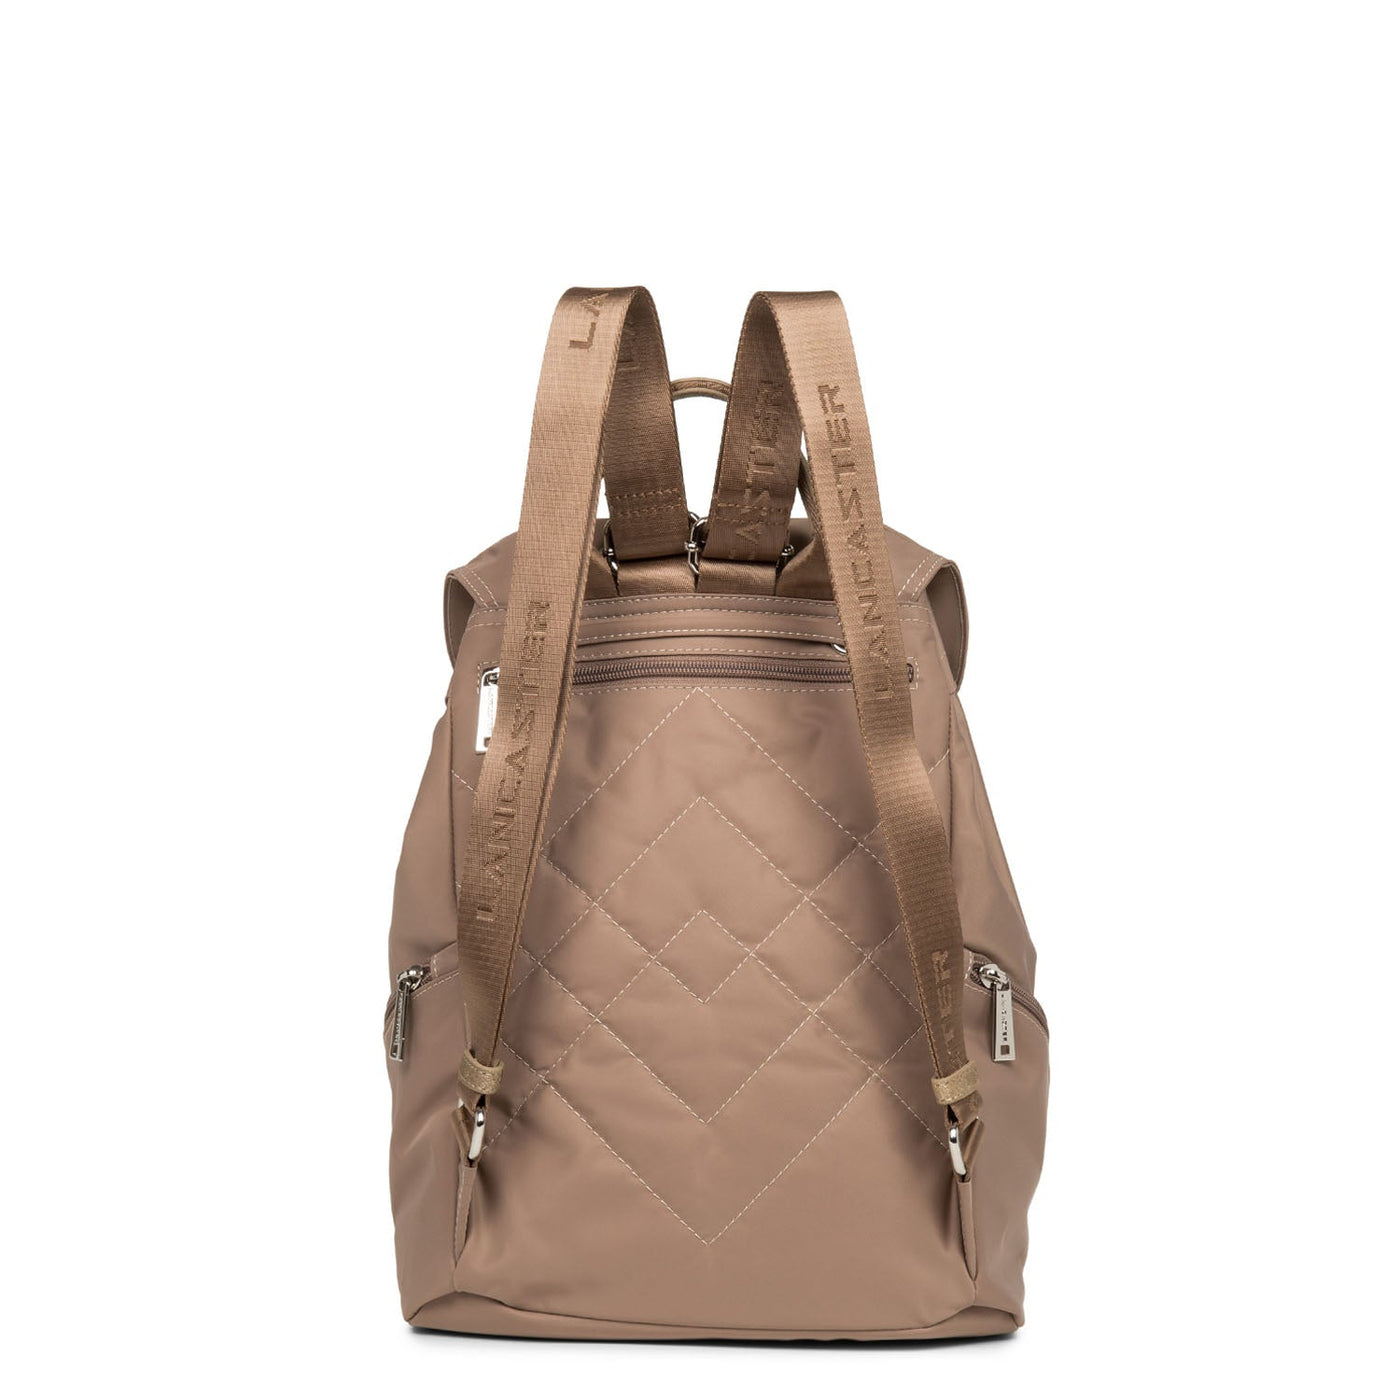 backpack - basic pompon #couleur_nude-champagne